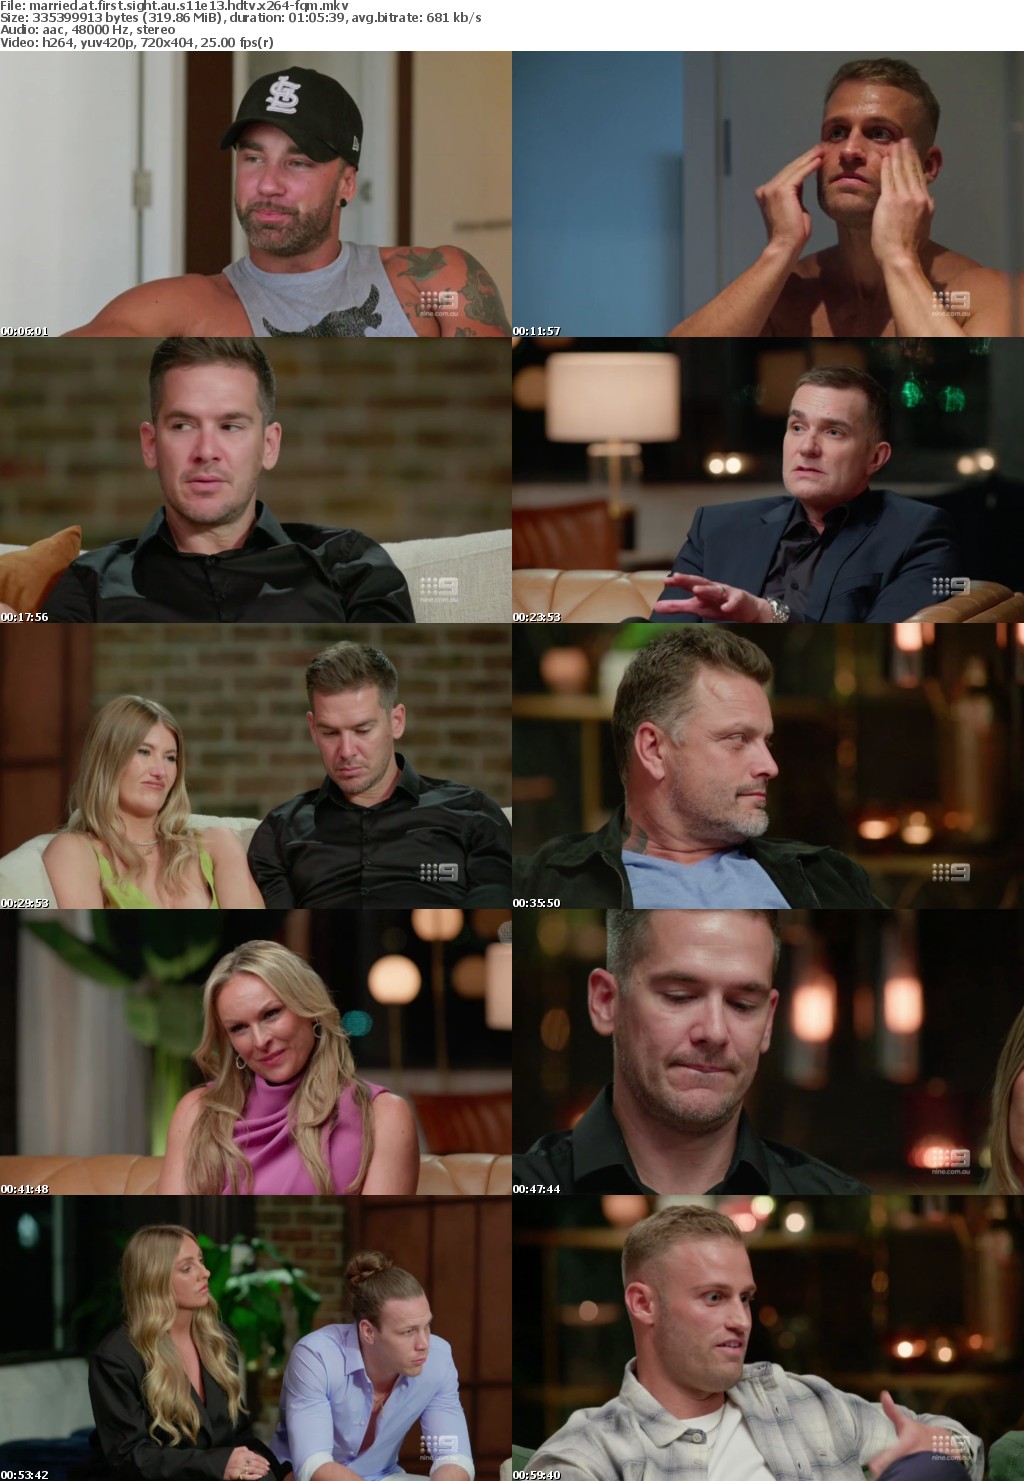 Married At First Sight AU S11E13 HDTV x264-FQM